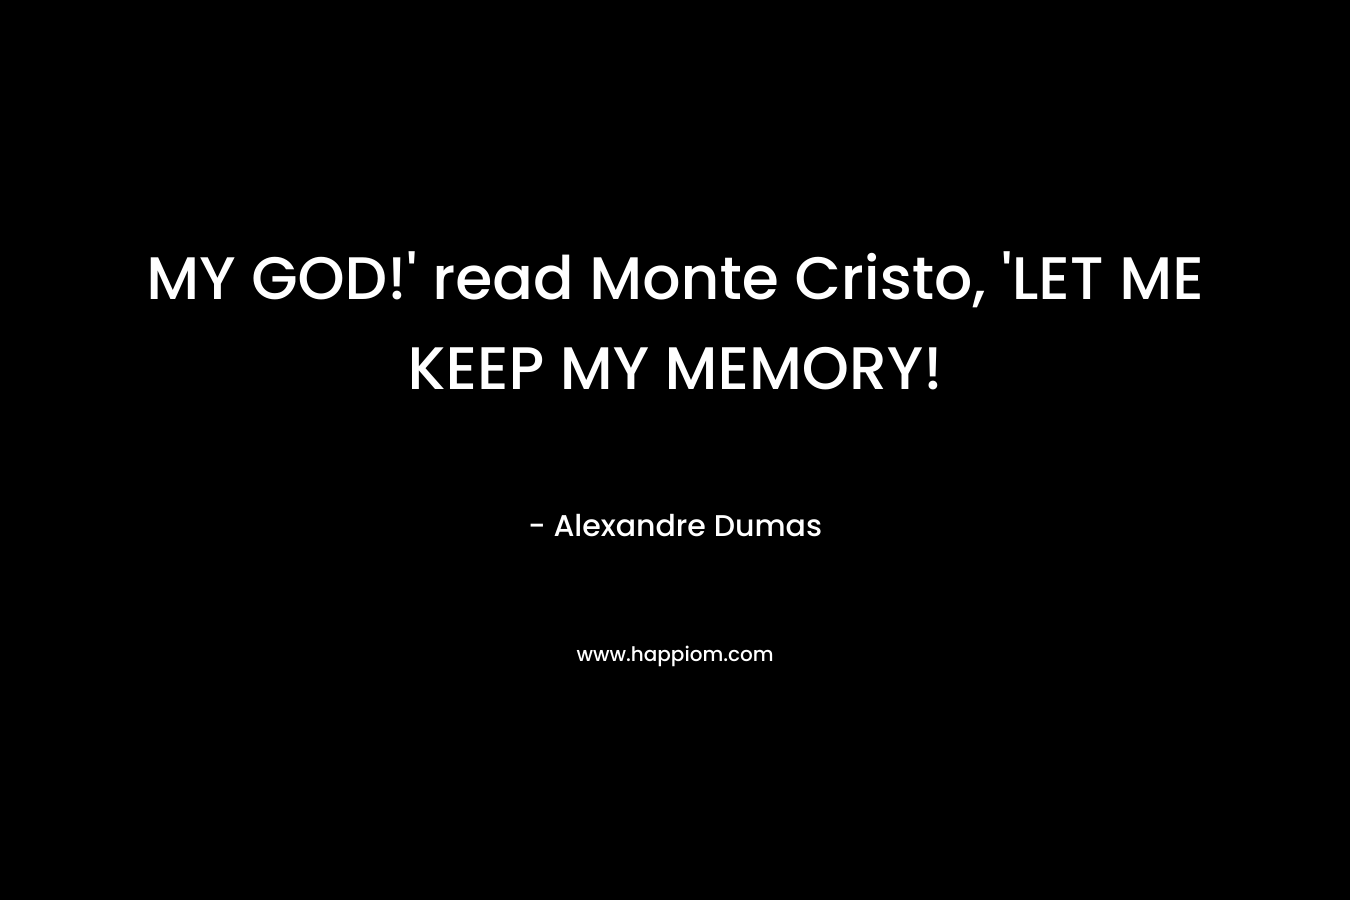 MY GOD!' read Monte Cristo, 'LET ME KEEP MY MEMORY!